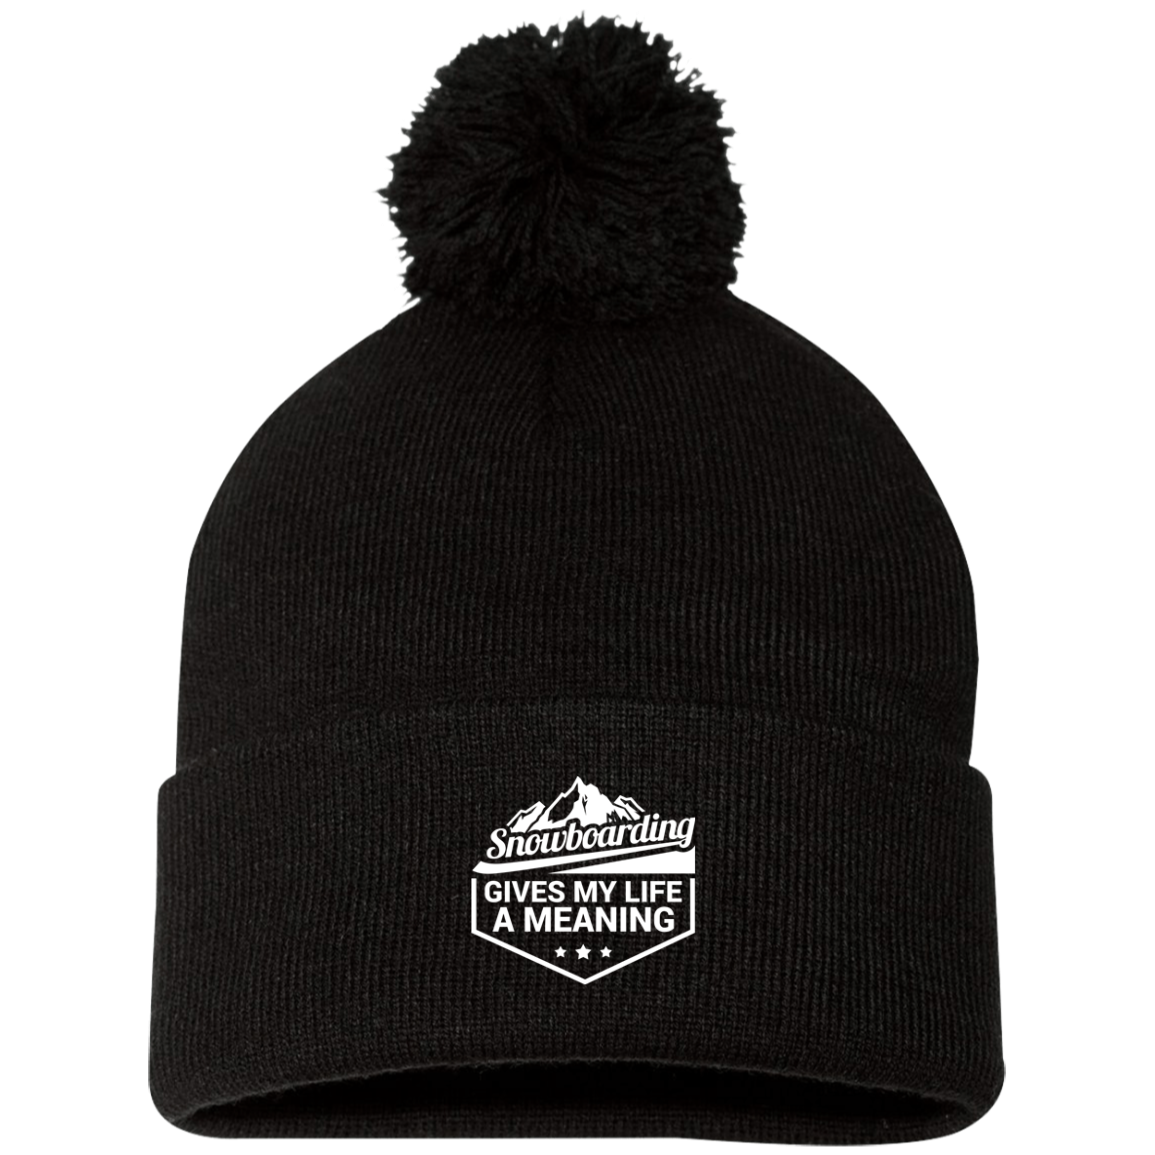 Snowboarding Gives My Life a Meaning Pom Pom Knit Cap - Powderaddicts